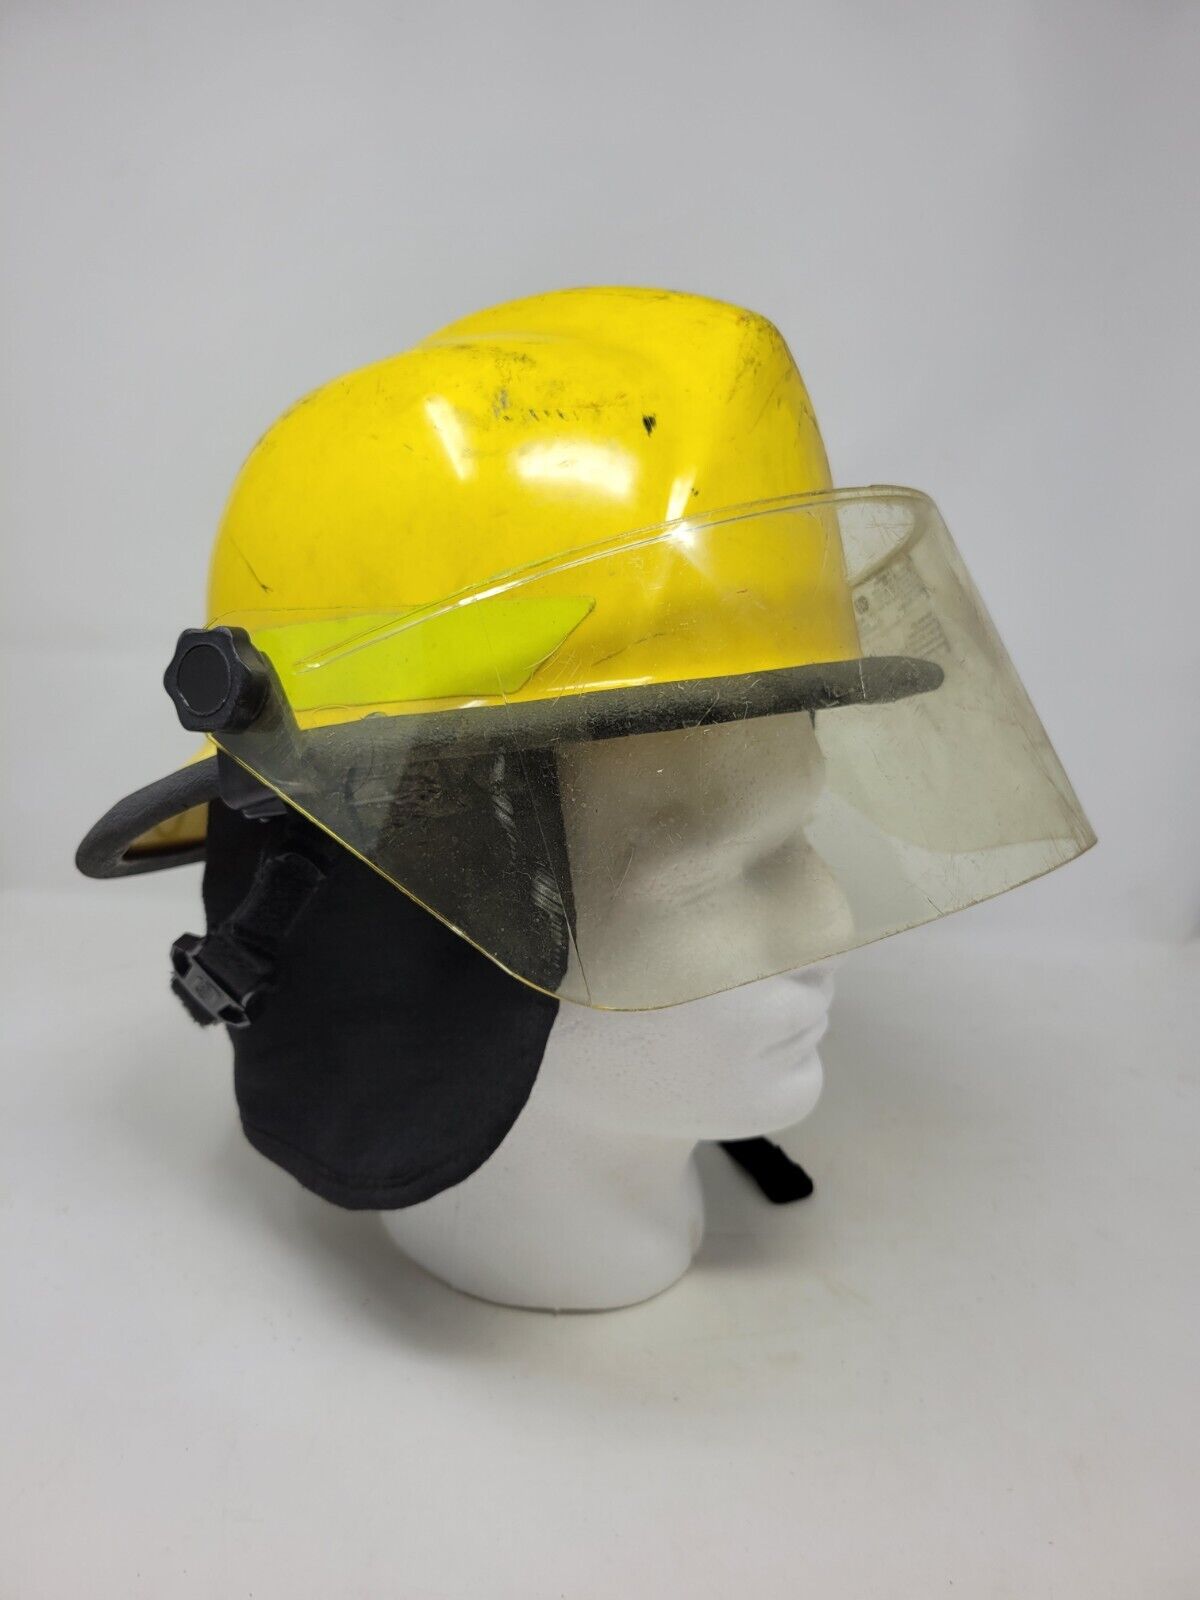 Pre-Owned Yellow Bullard LT Thermoplastic Fire Helmet With Visor See Pictures